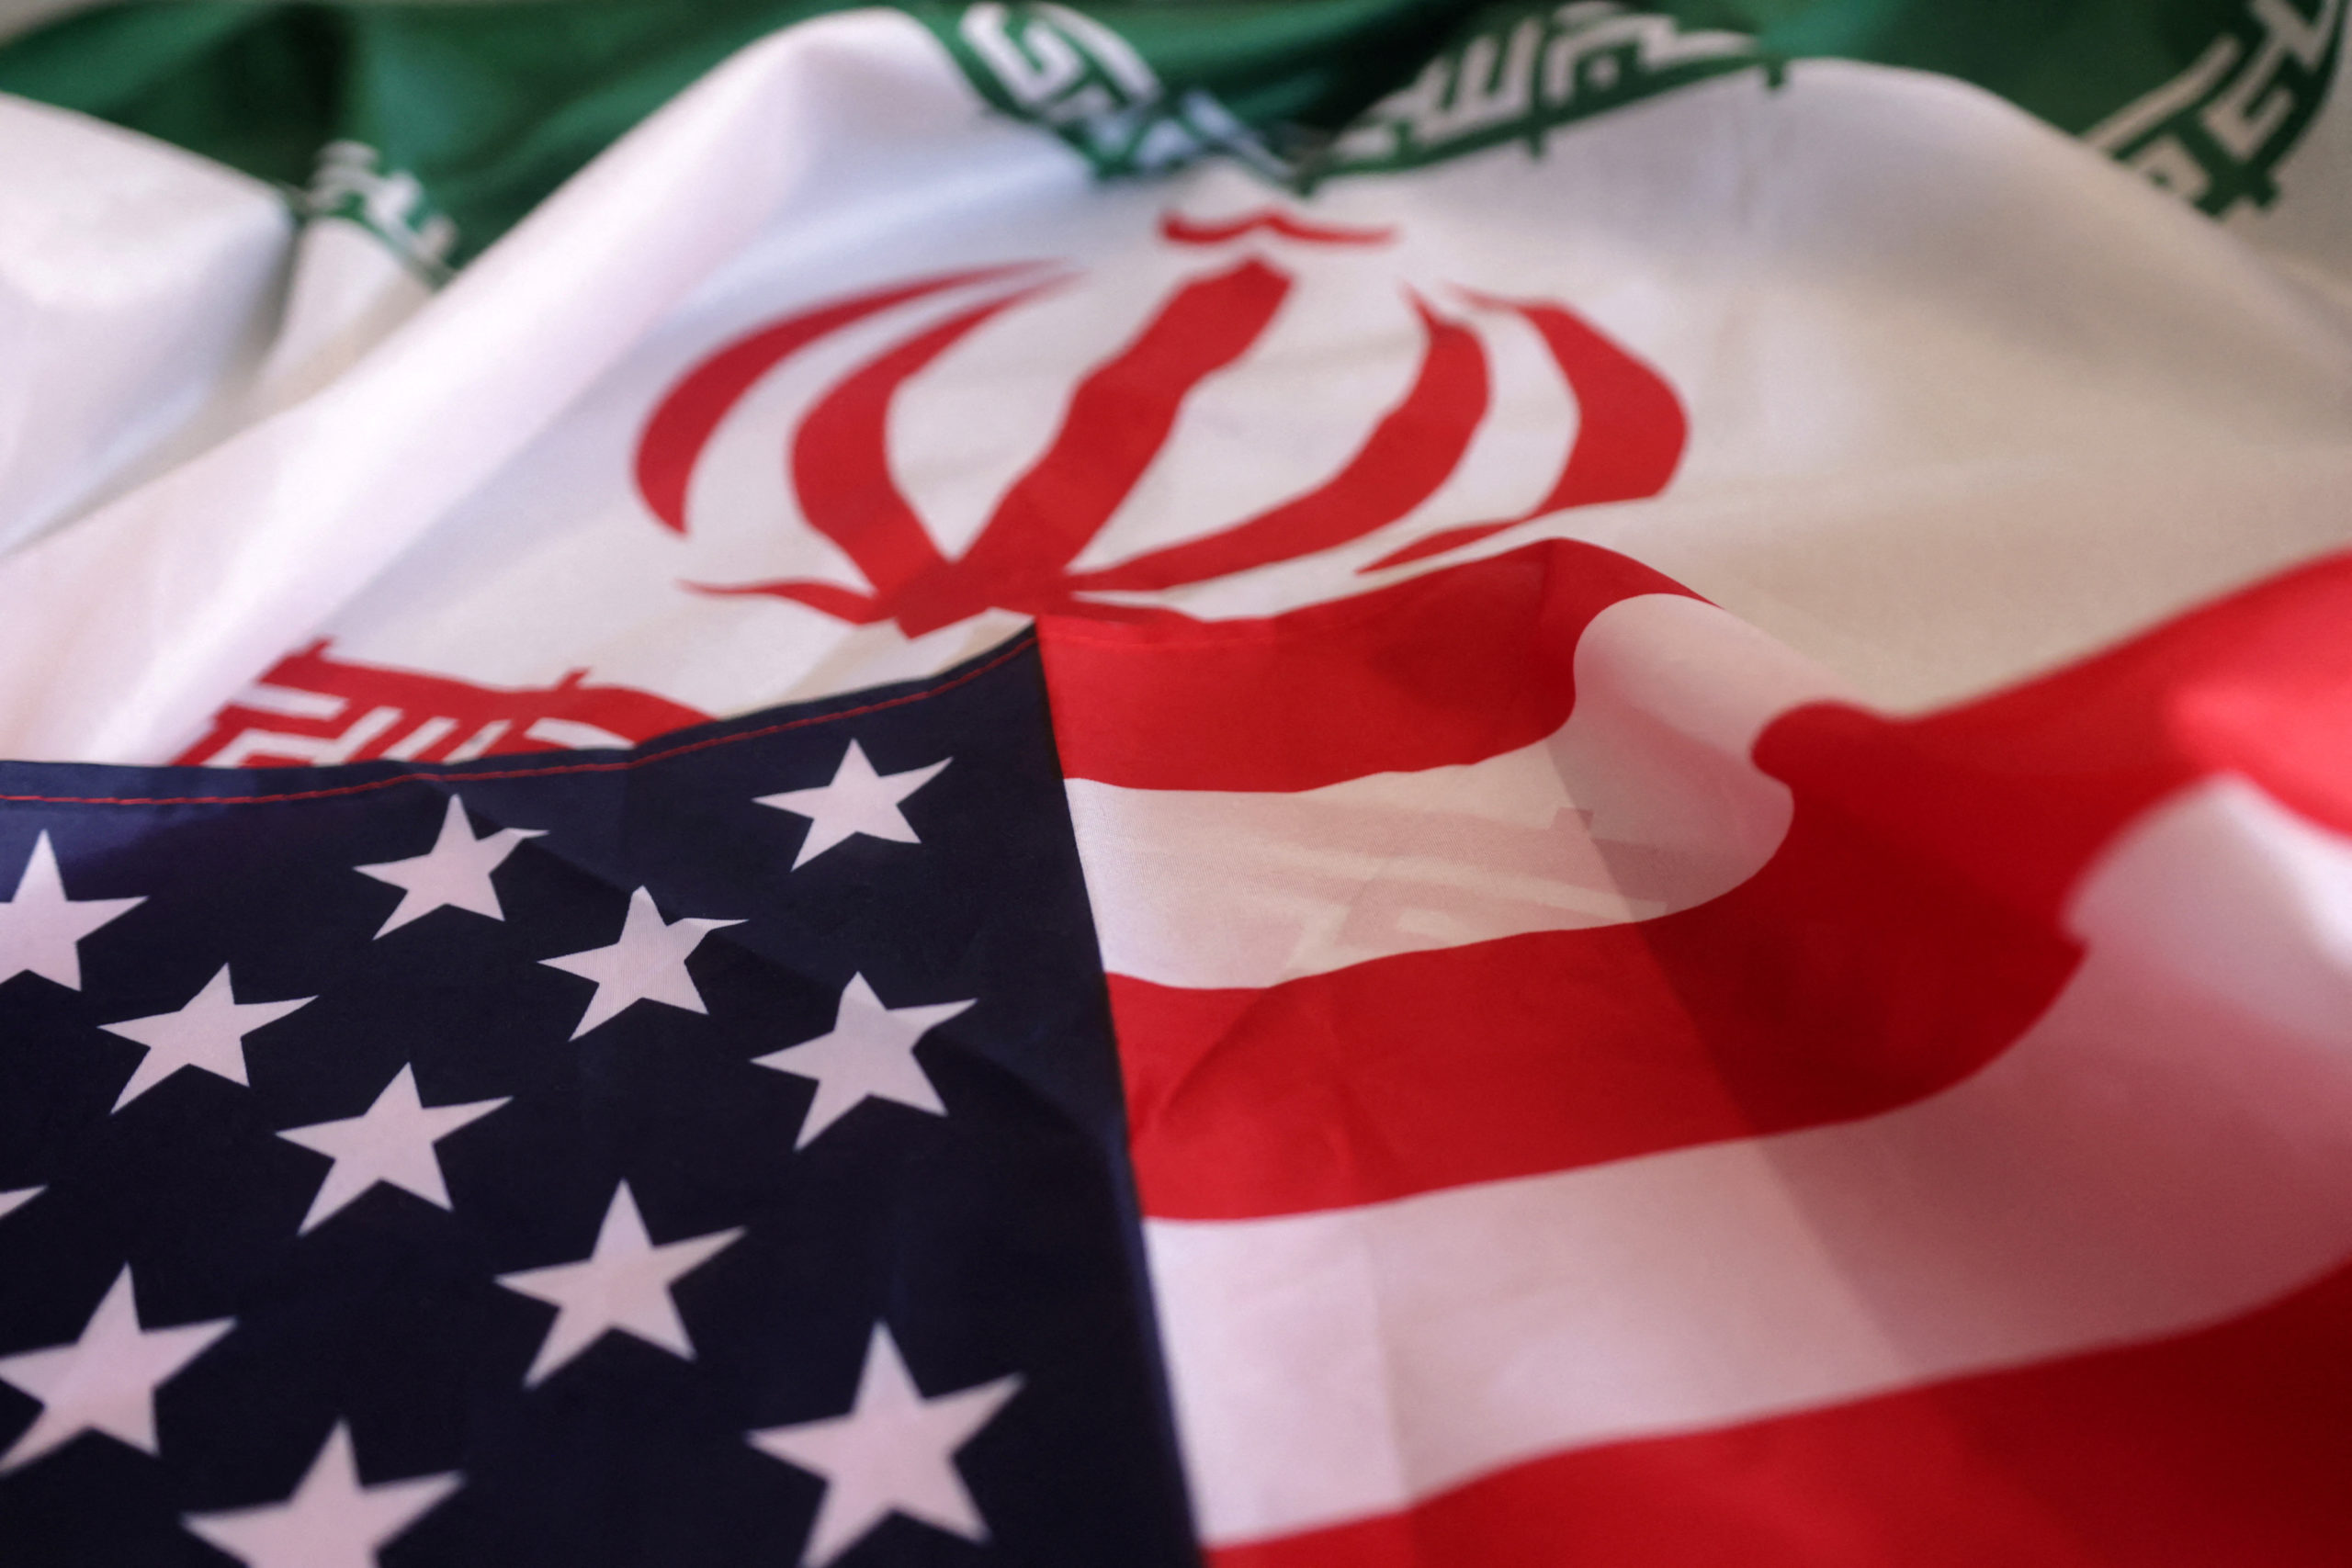 The US imposes sanctions on firms it said had transported or sold Iranian petroleum or petrochemical products in violation of U.S. restrictions